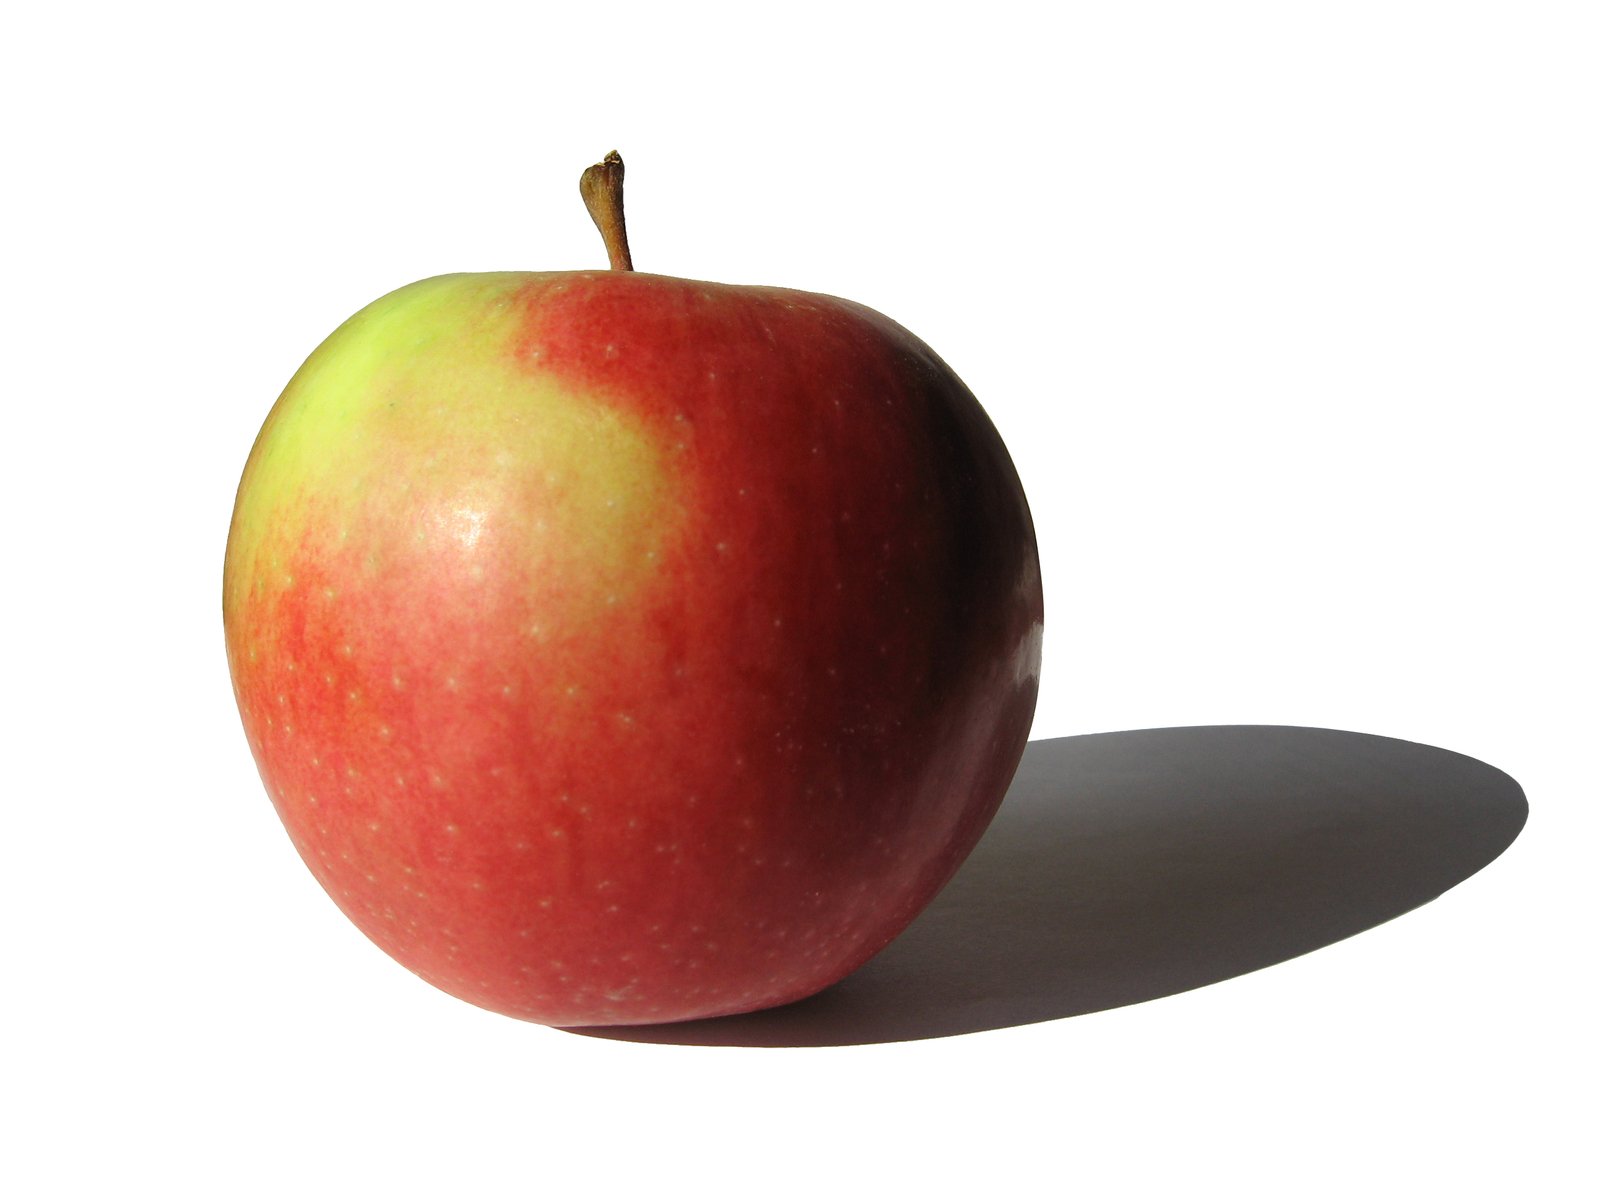 a red apple is sitting on a white surface